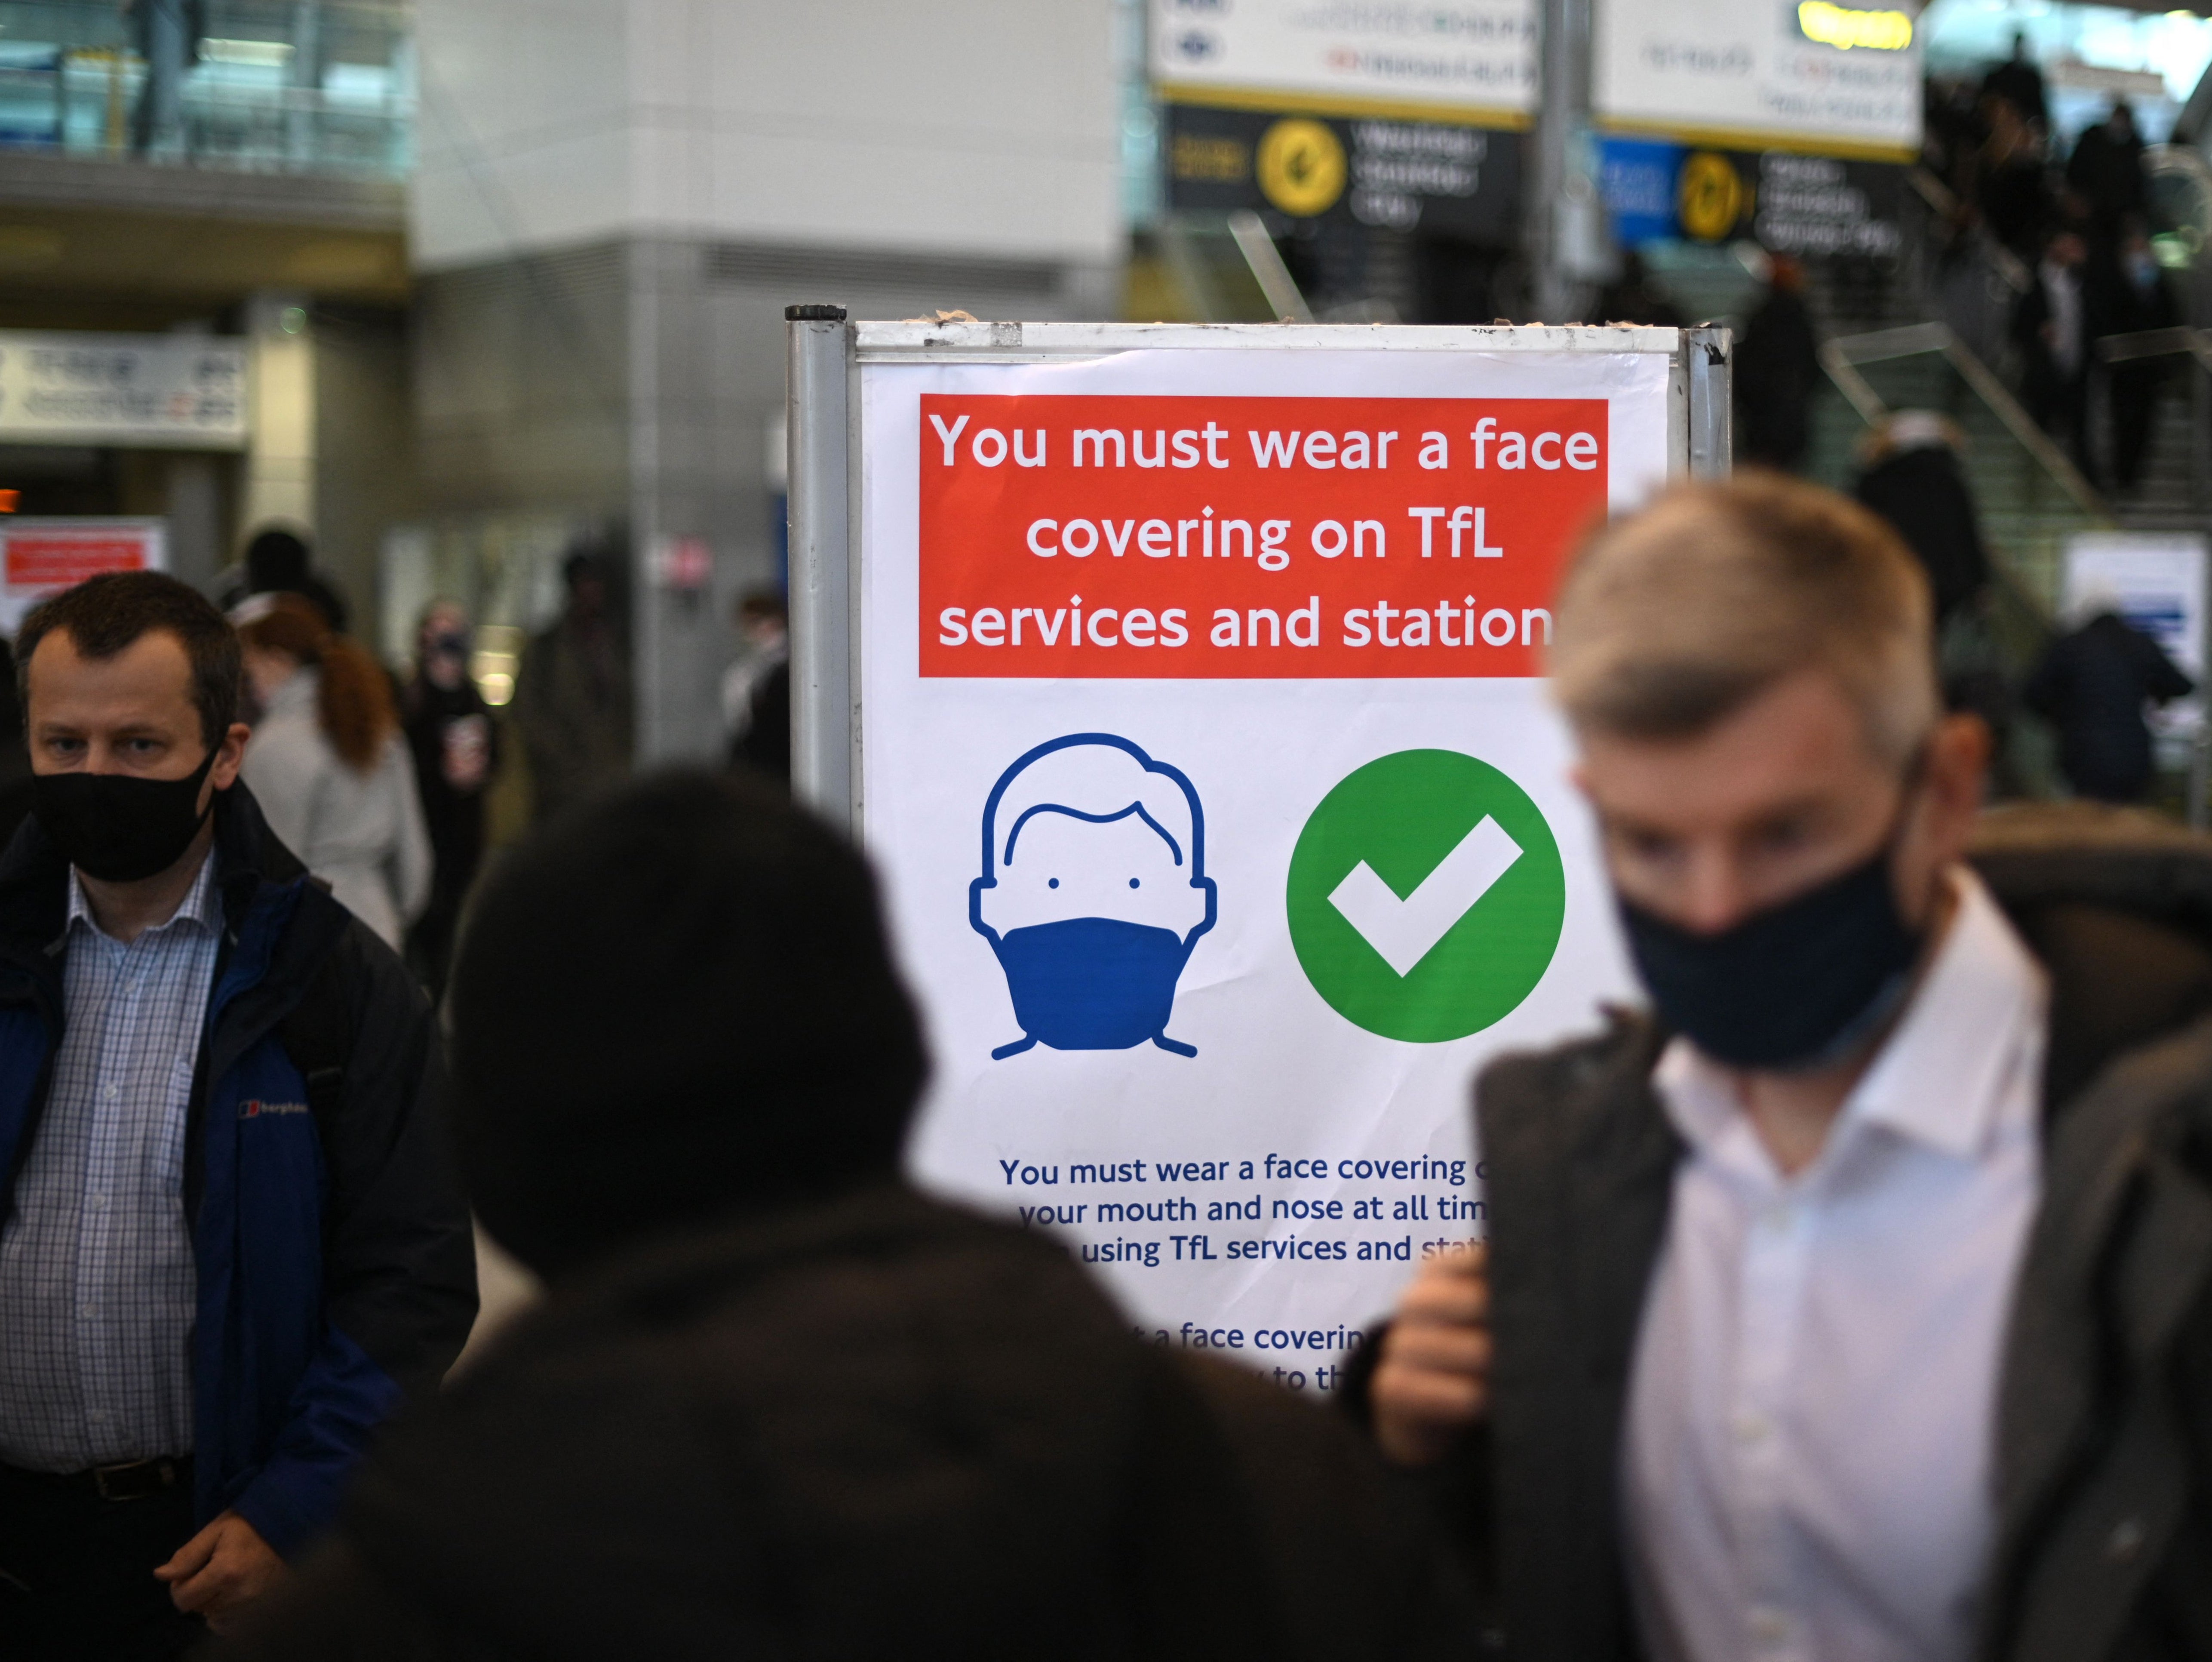 Commuters walk past a notice board reminding them of wearing face coverings at Stratford Tube station in east London on 1 December